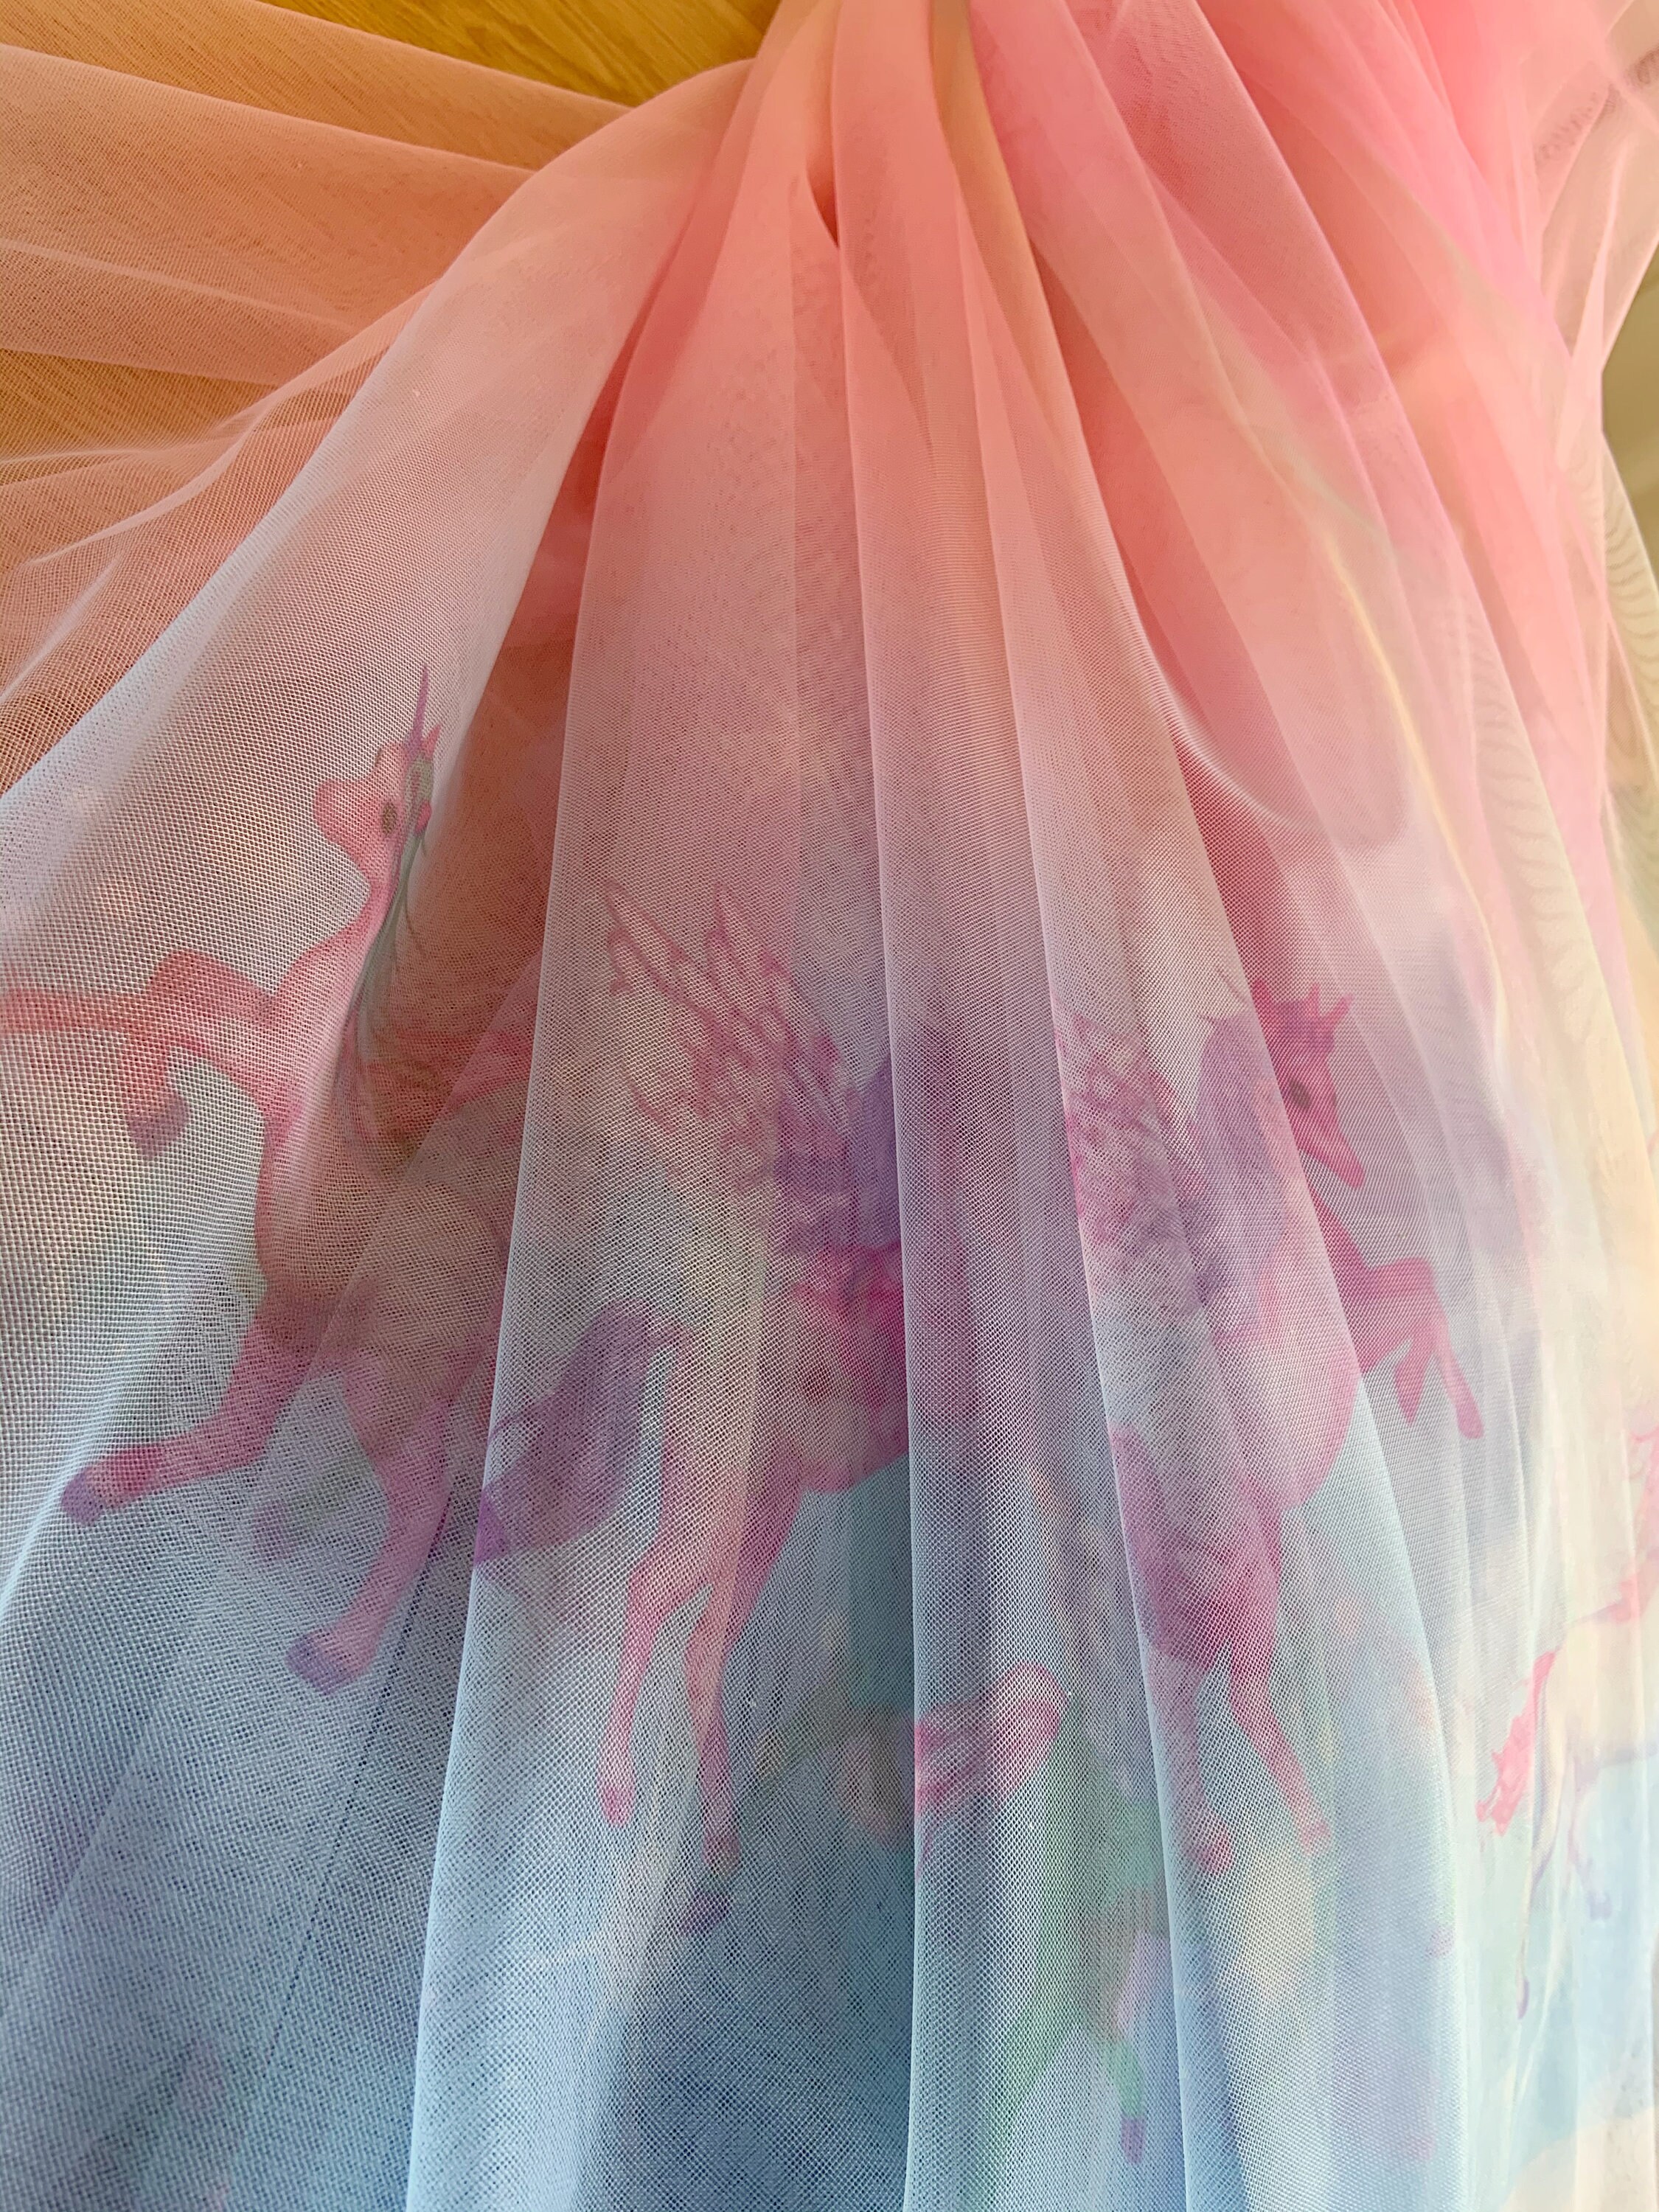 Pink ombre tulle fabric - Lace To Love